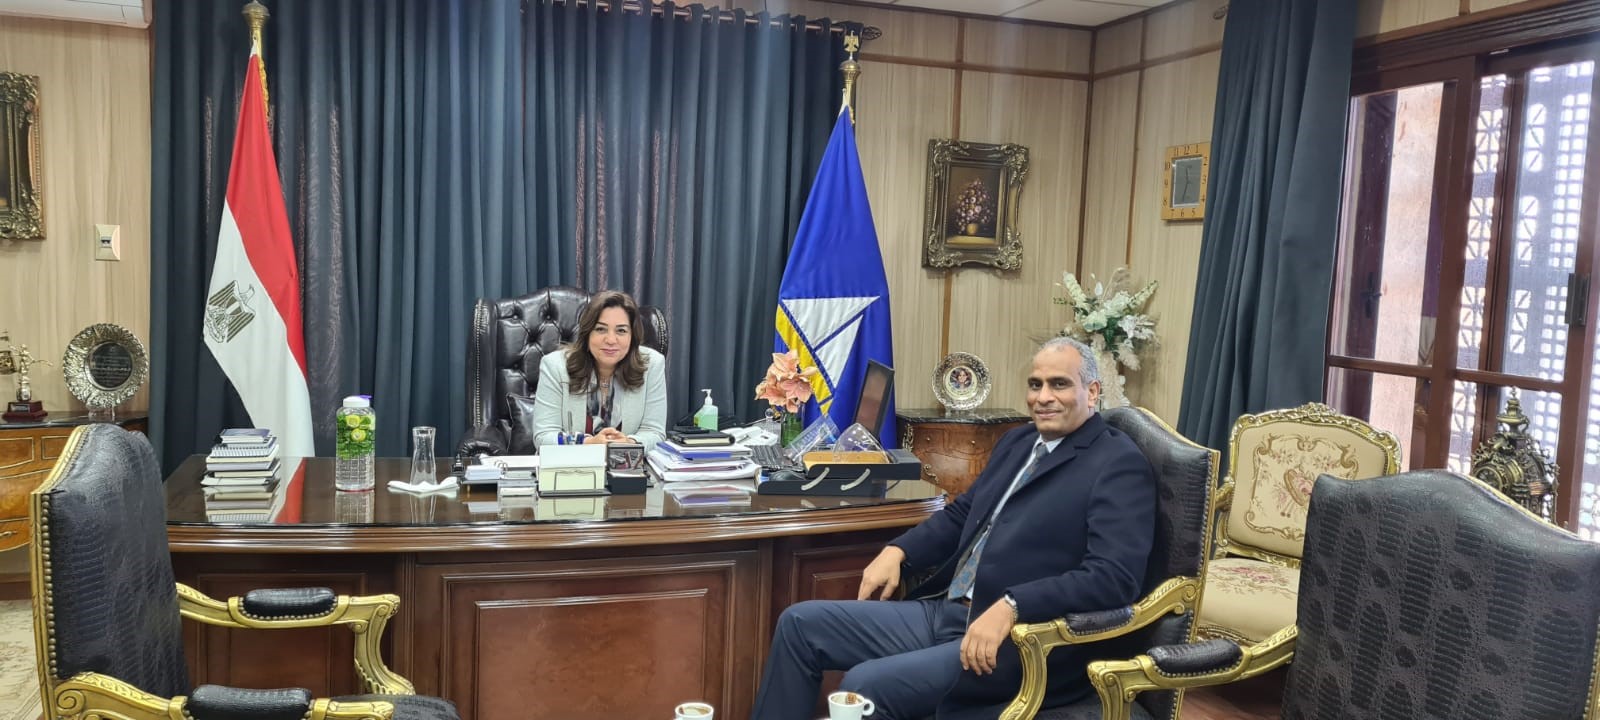 The Governor of Damietta meets with the Chairman of the Misr Fertilizer Production Company